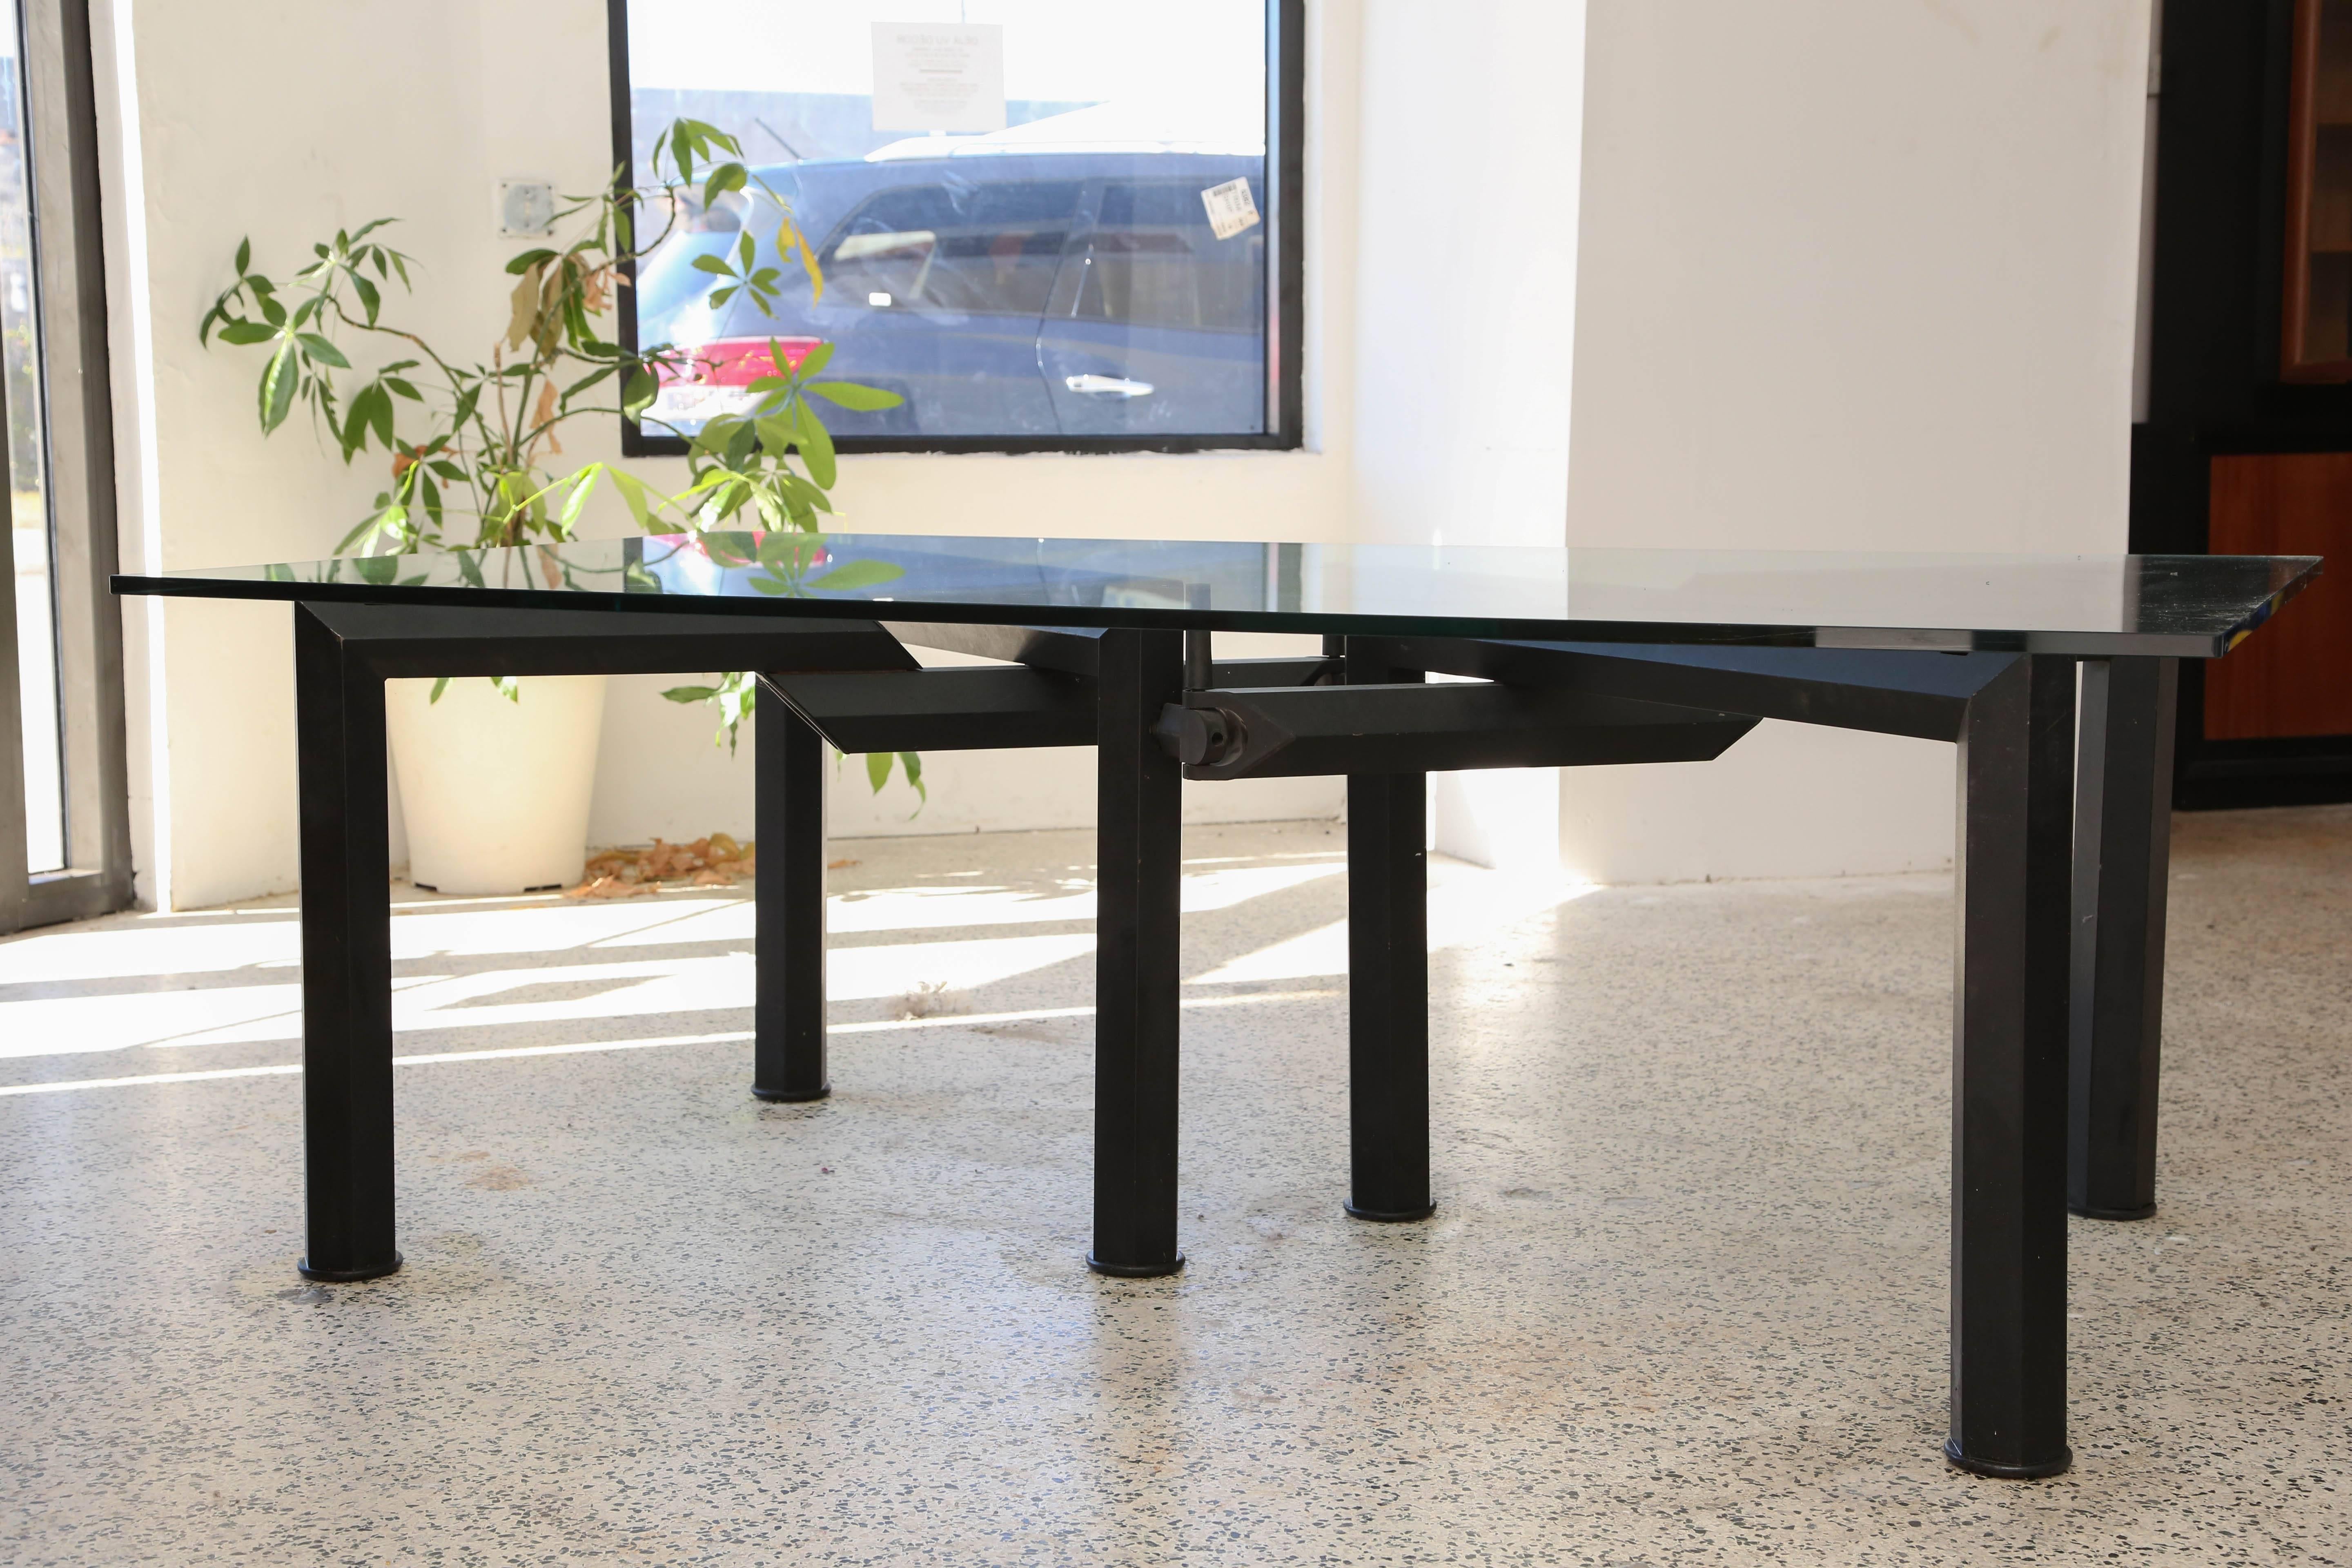 Large dining/conference table in metal and glass by Bruno Rota. We are happy to provide the original glass with this piece, free of charge, but we suggest purchasing new glass.